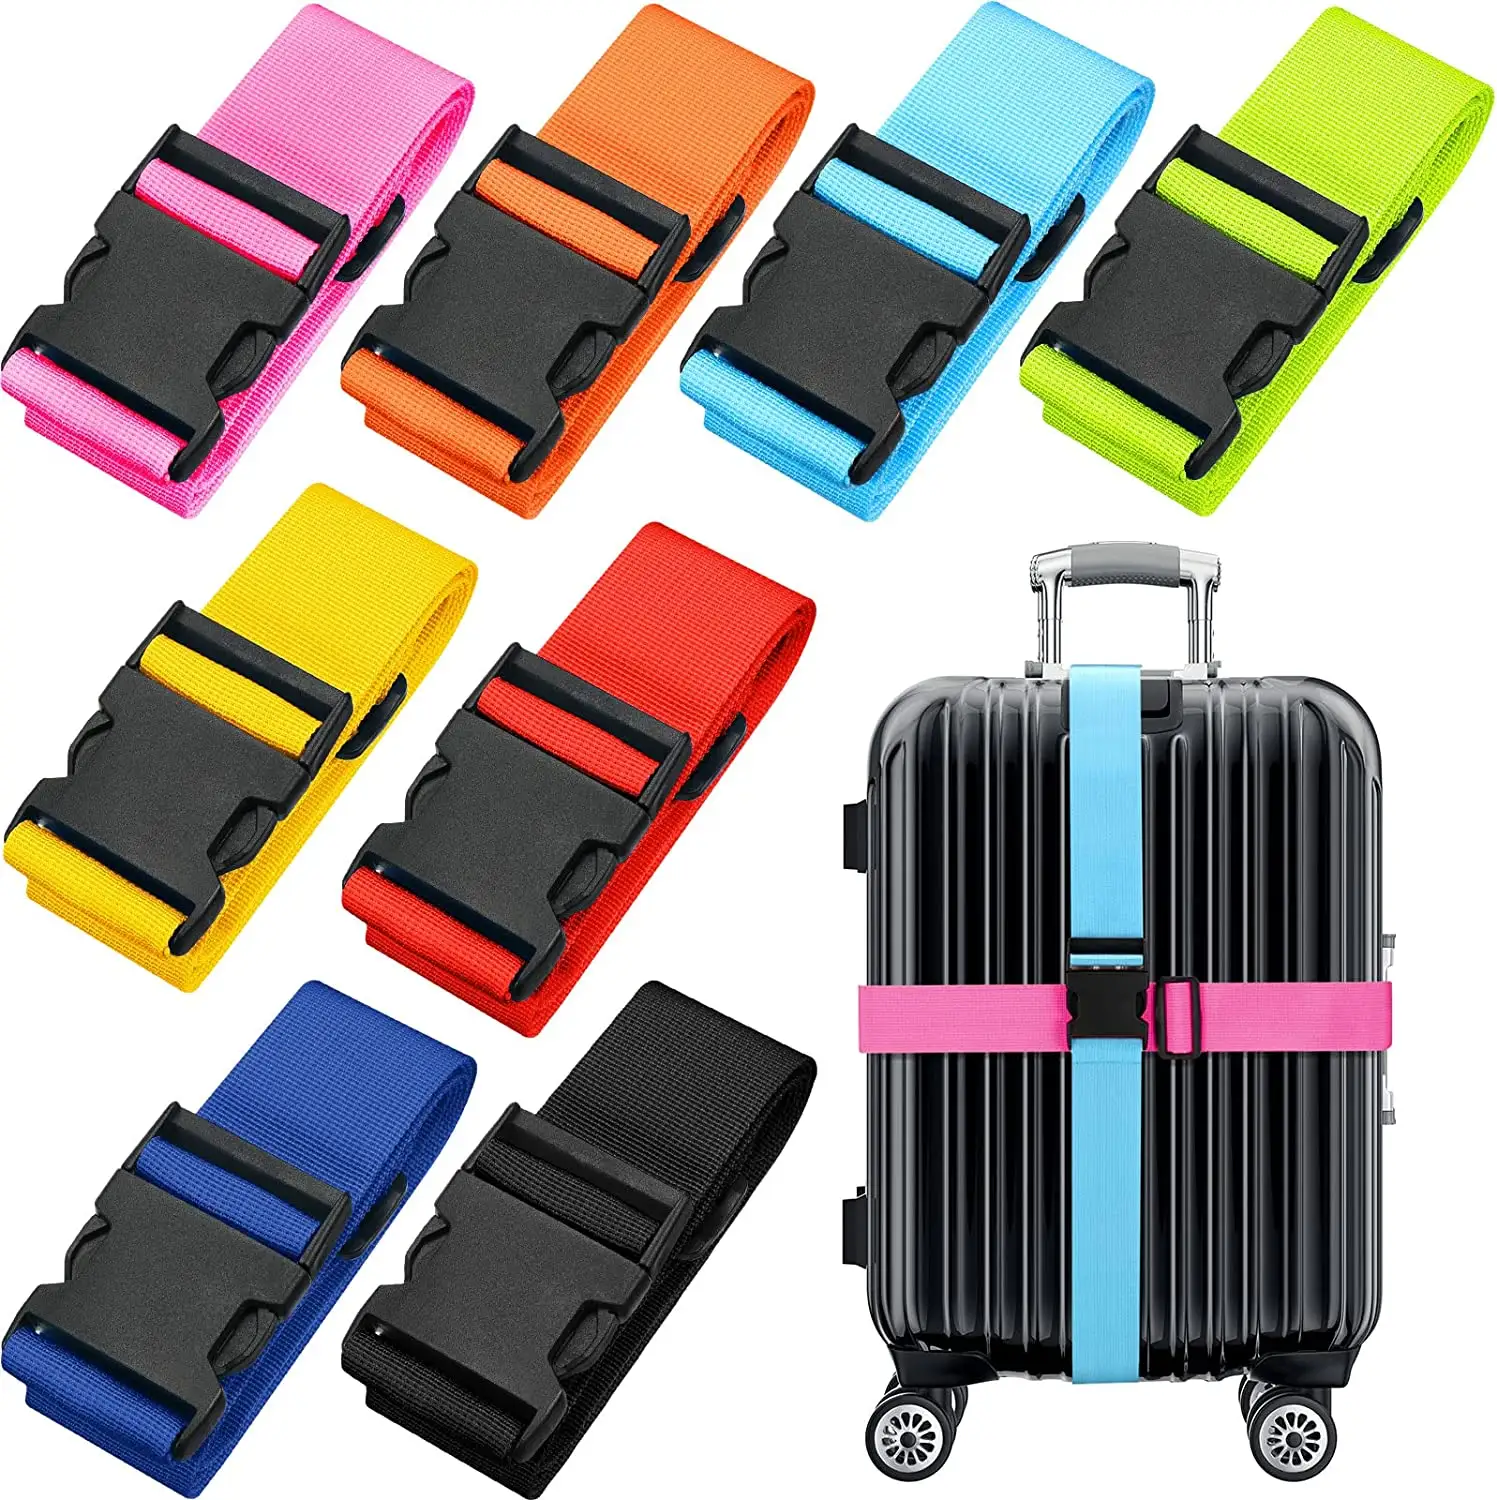 Adjustable Cross Luggage Buckle Straps for Suitcases Travel Strap Belt with Silicone Name Tag